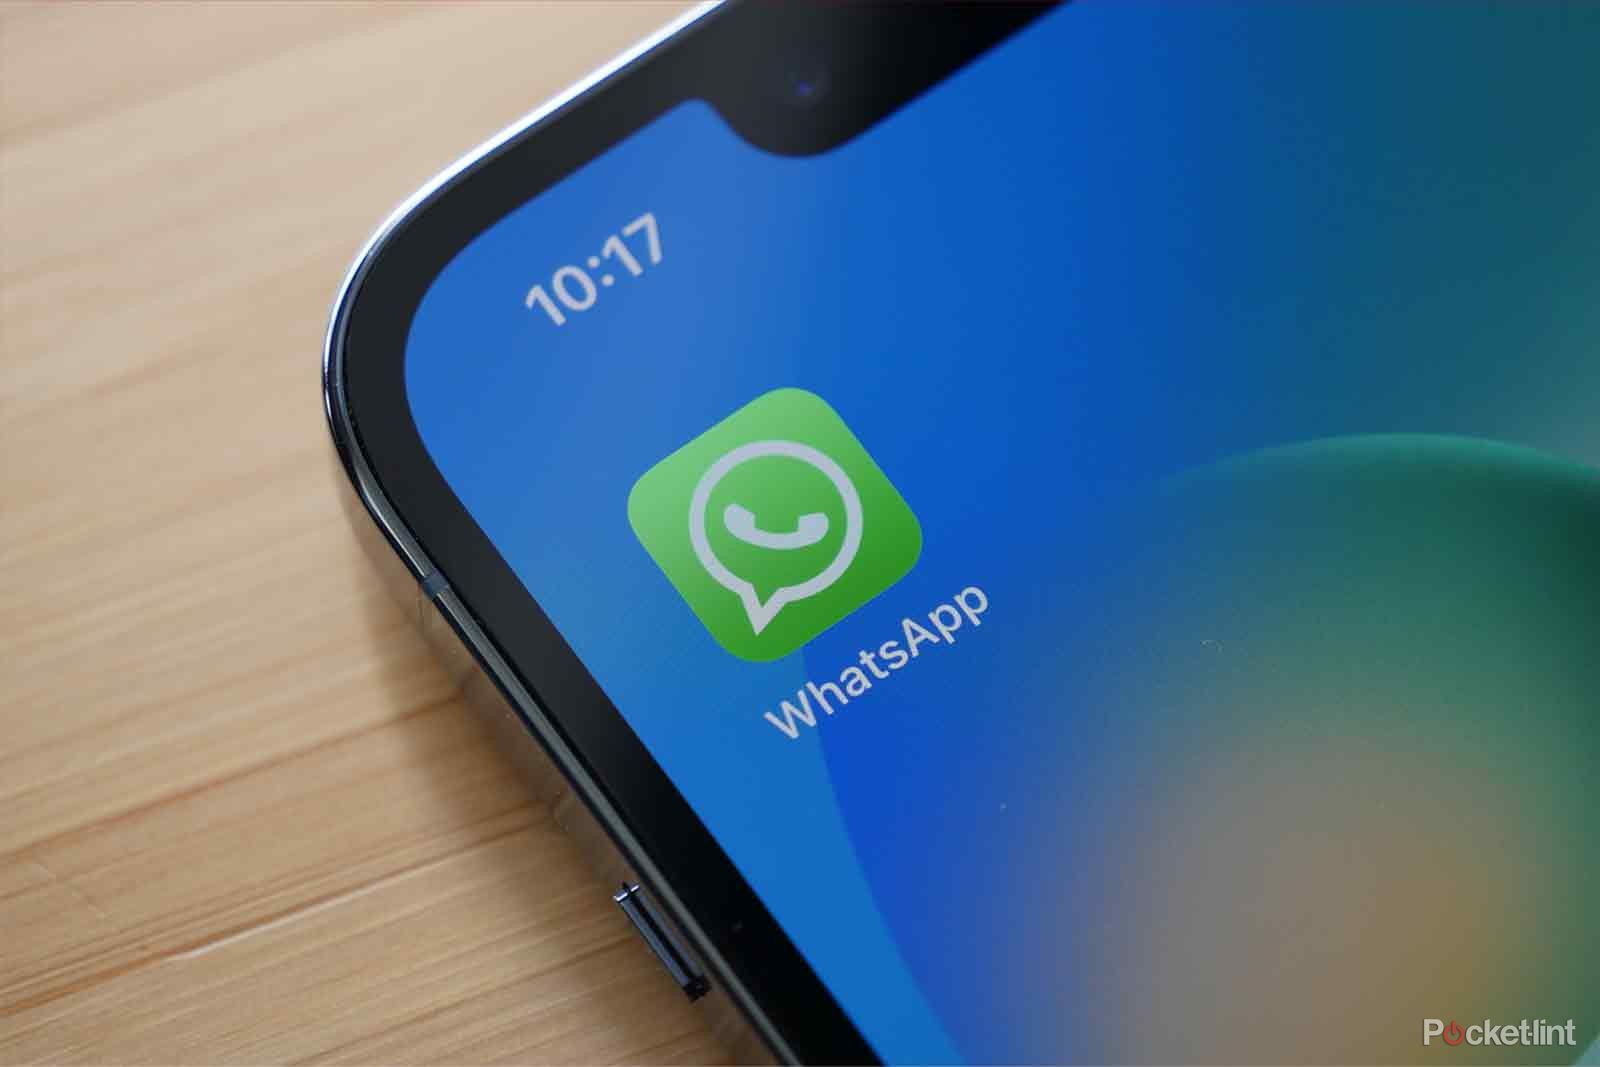 What are WhatsApp voice chats and how will they work?